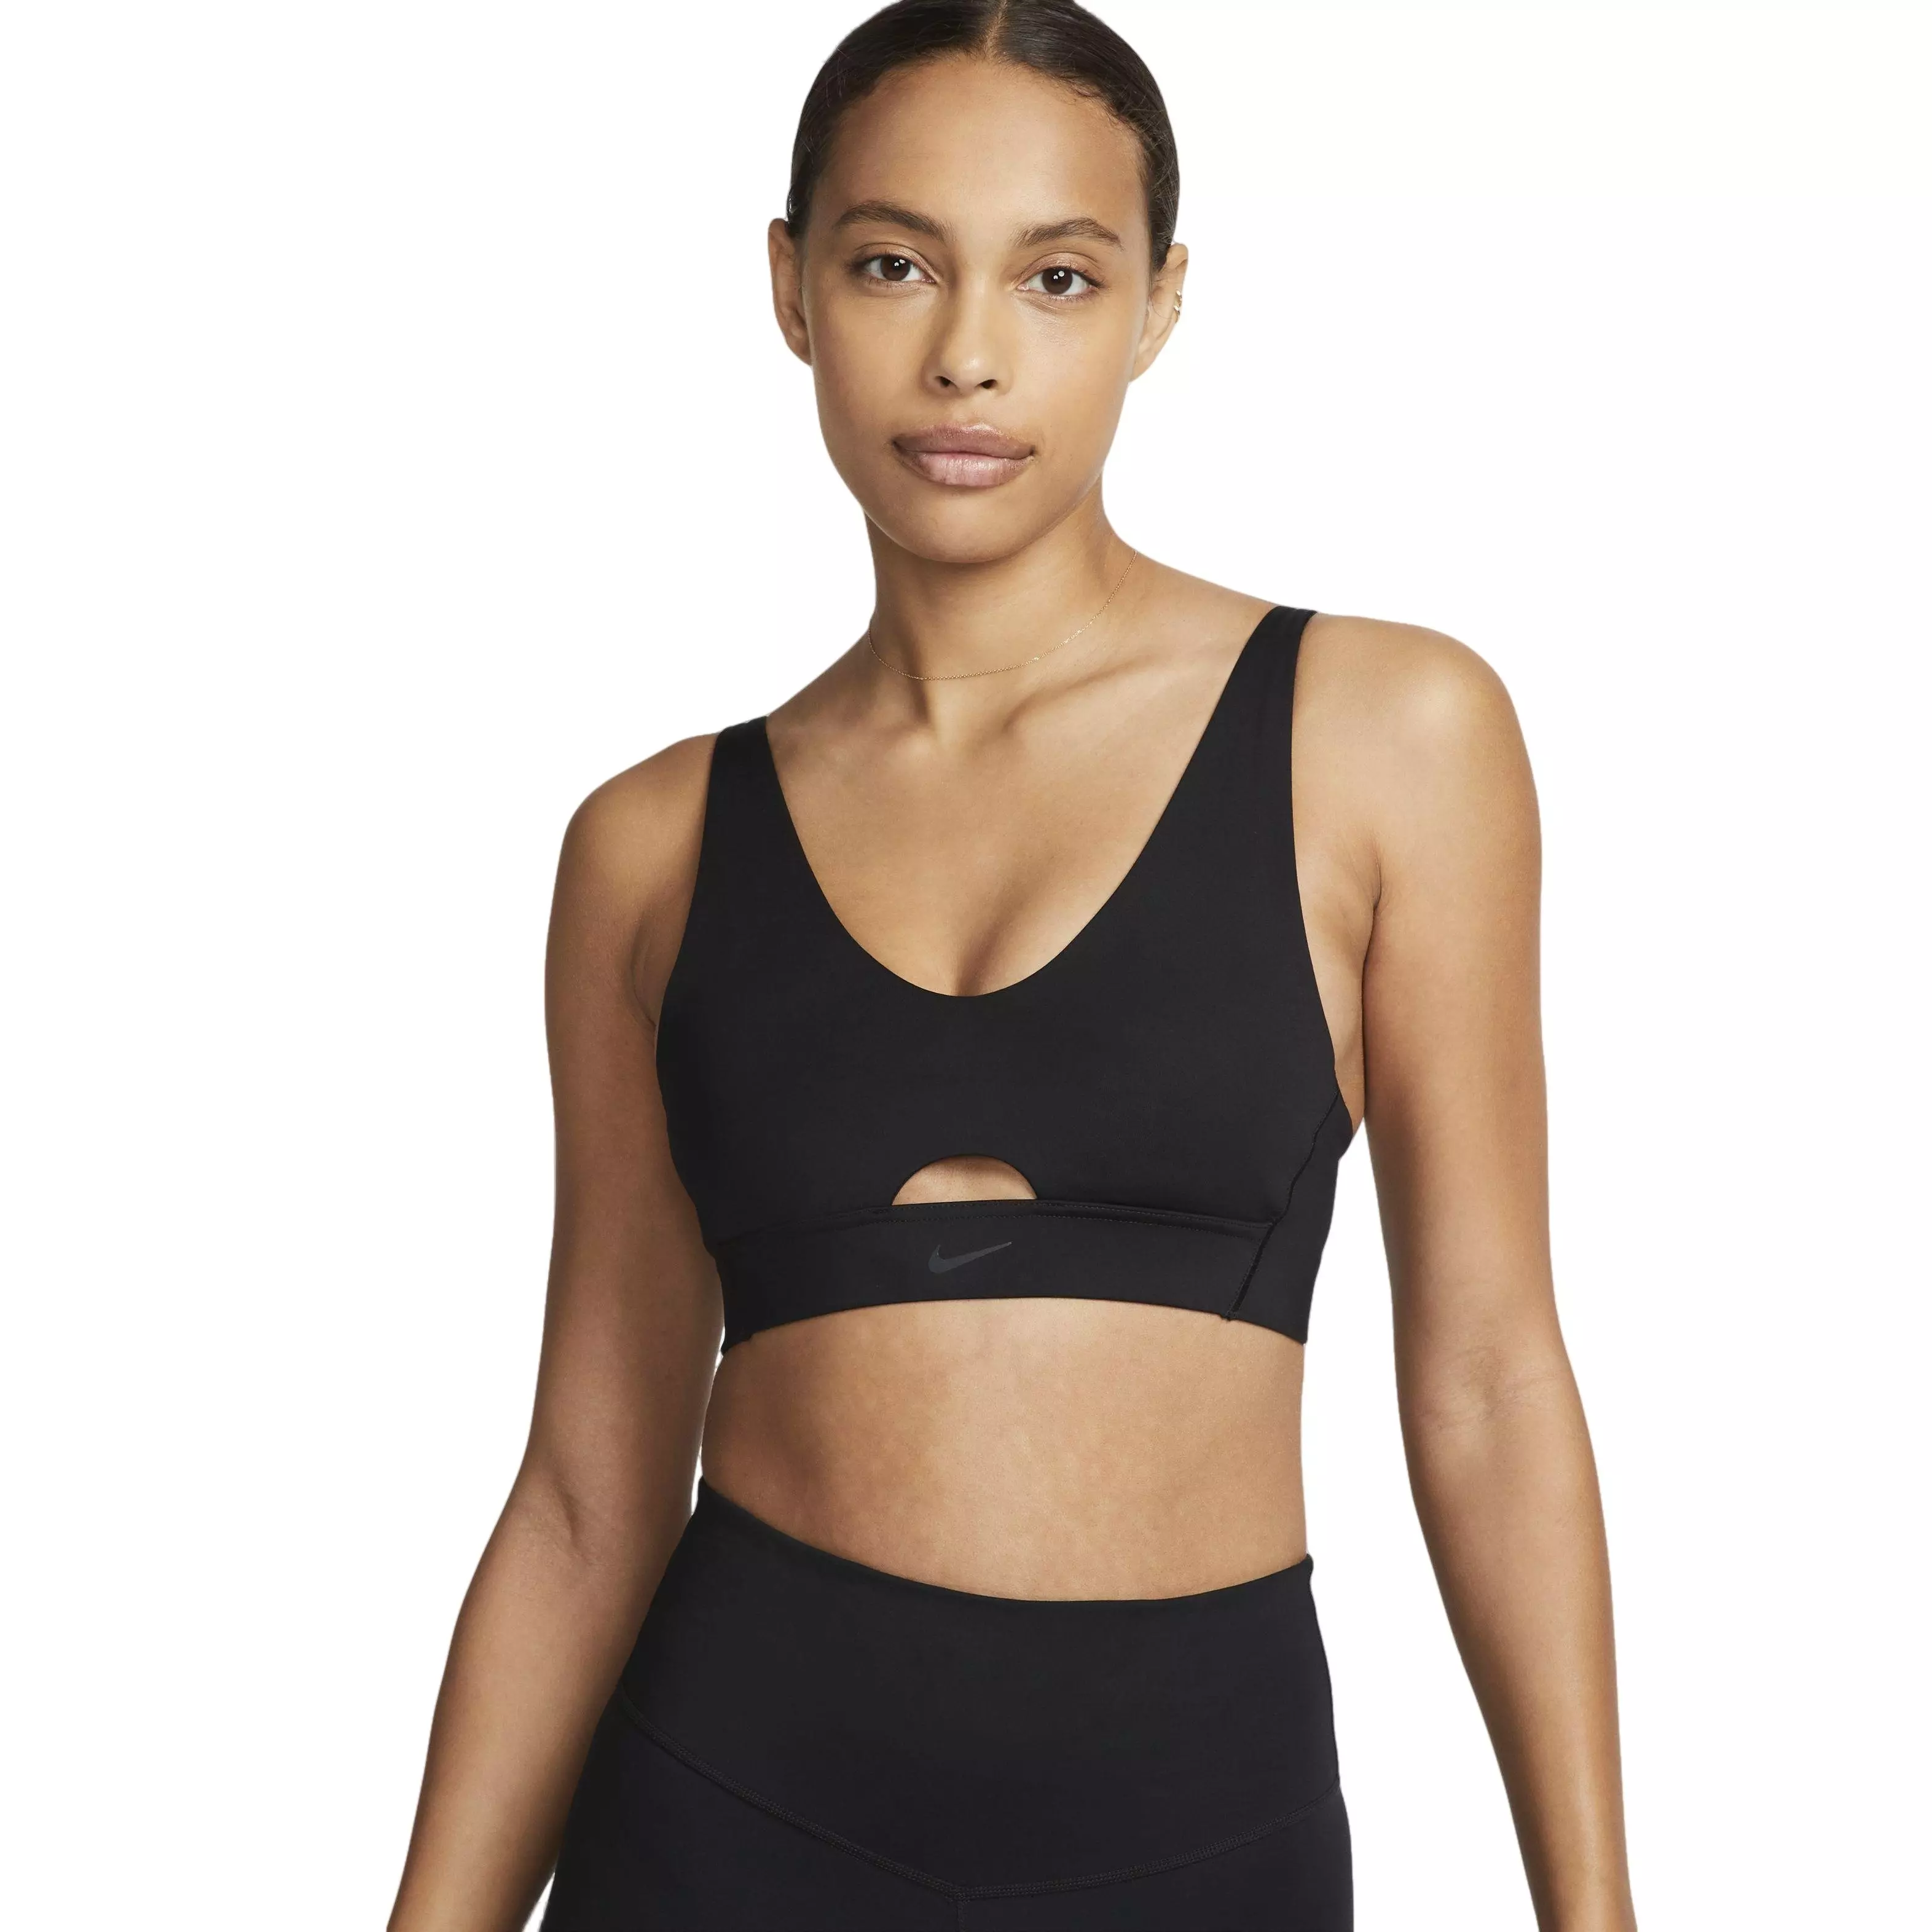 Urban Outfitters Out From Under Seamless Racerback Bra Top Size XS/S NWT